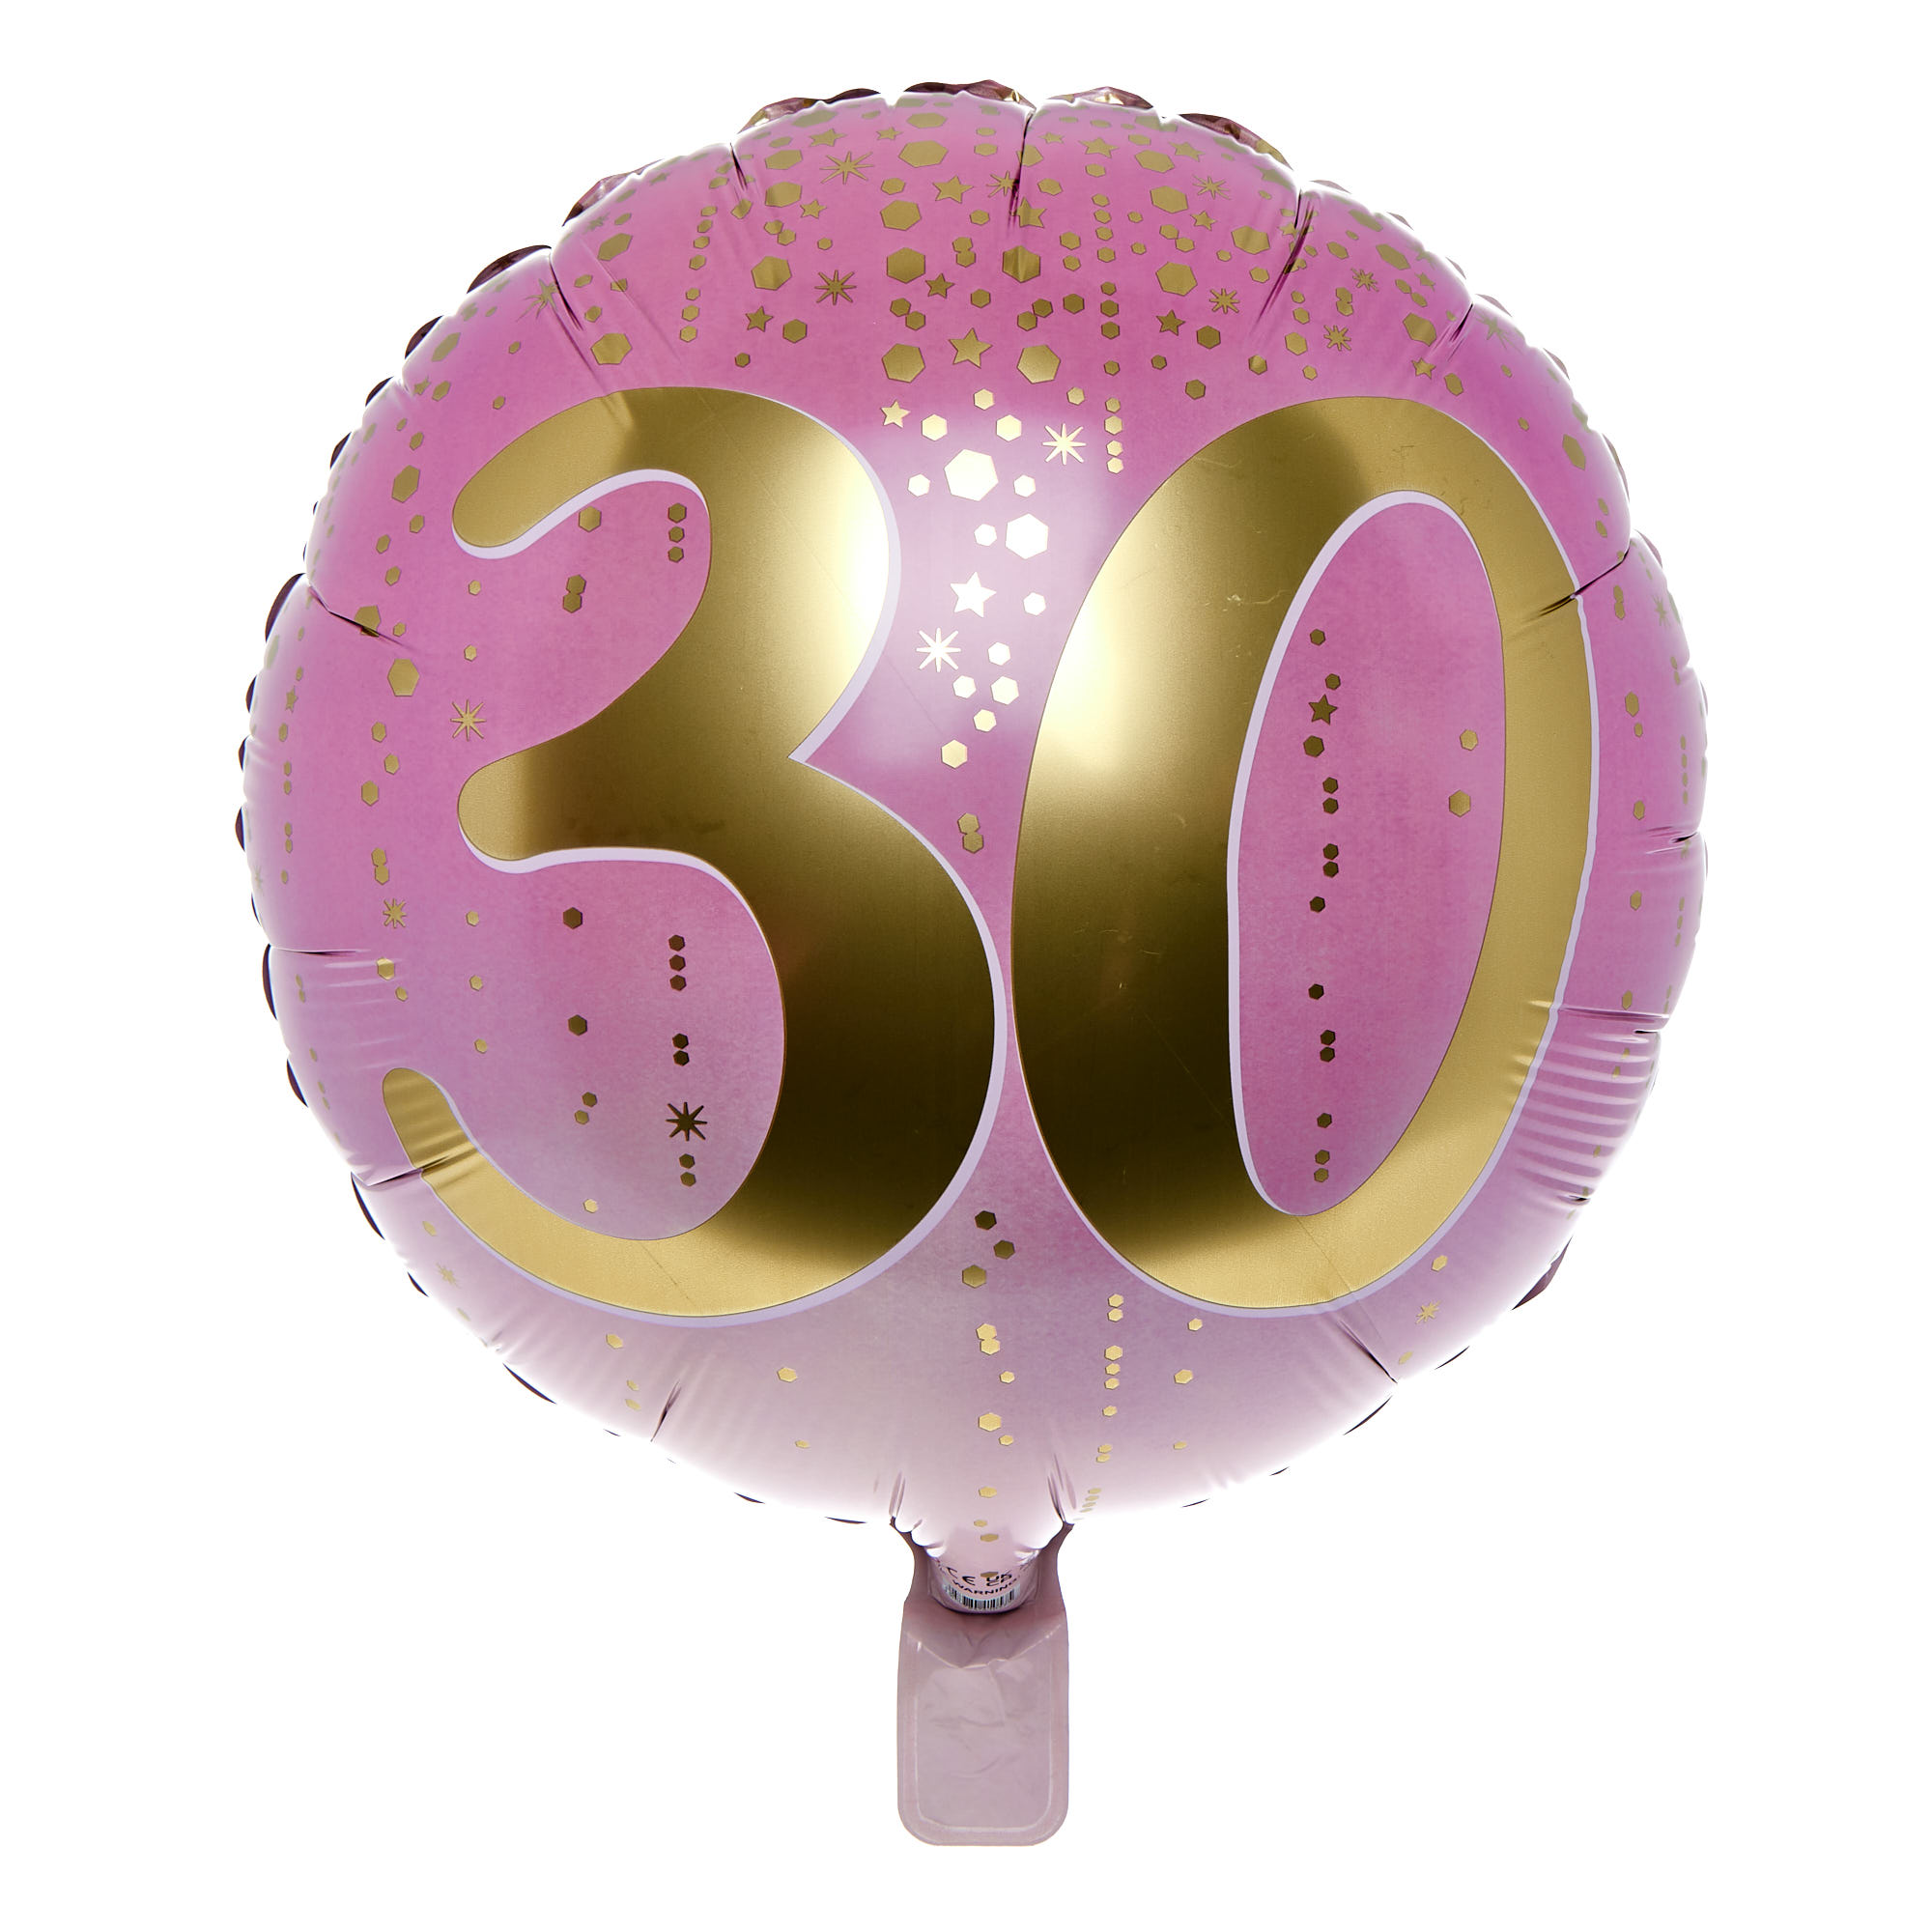 Pink & Gold 30th Birthday Balloon Bouquet - DELIVERED INFLATED!